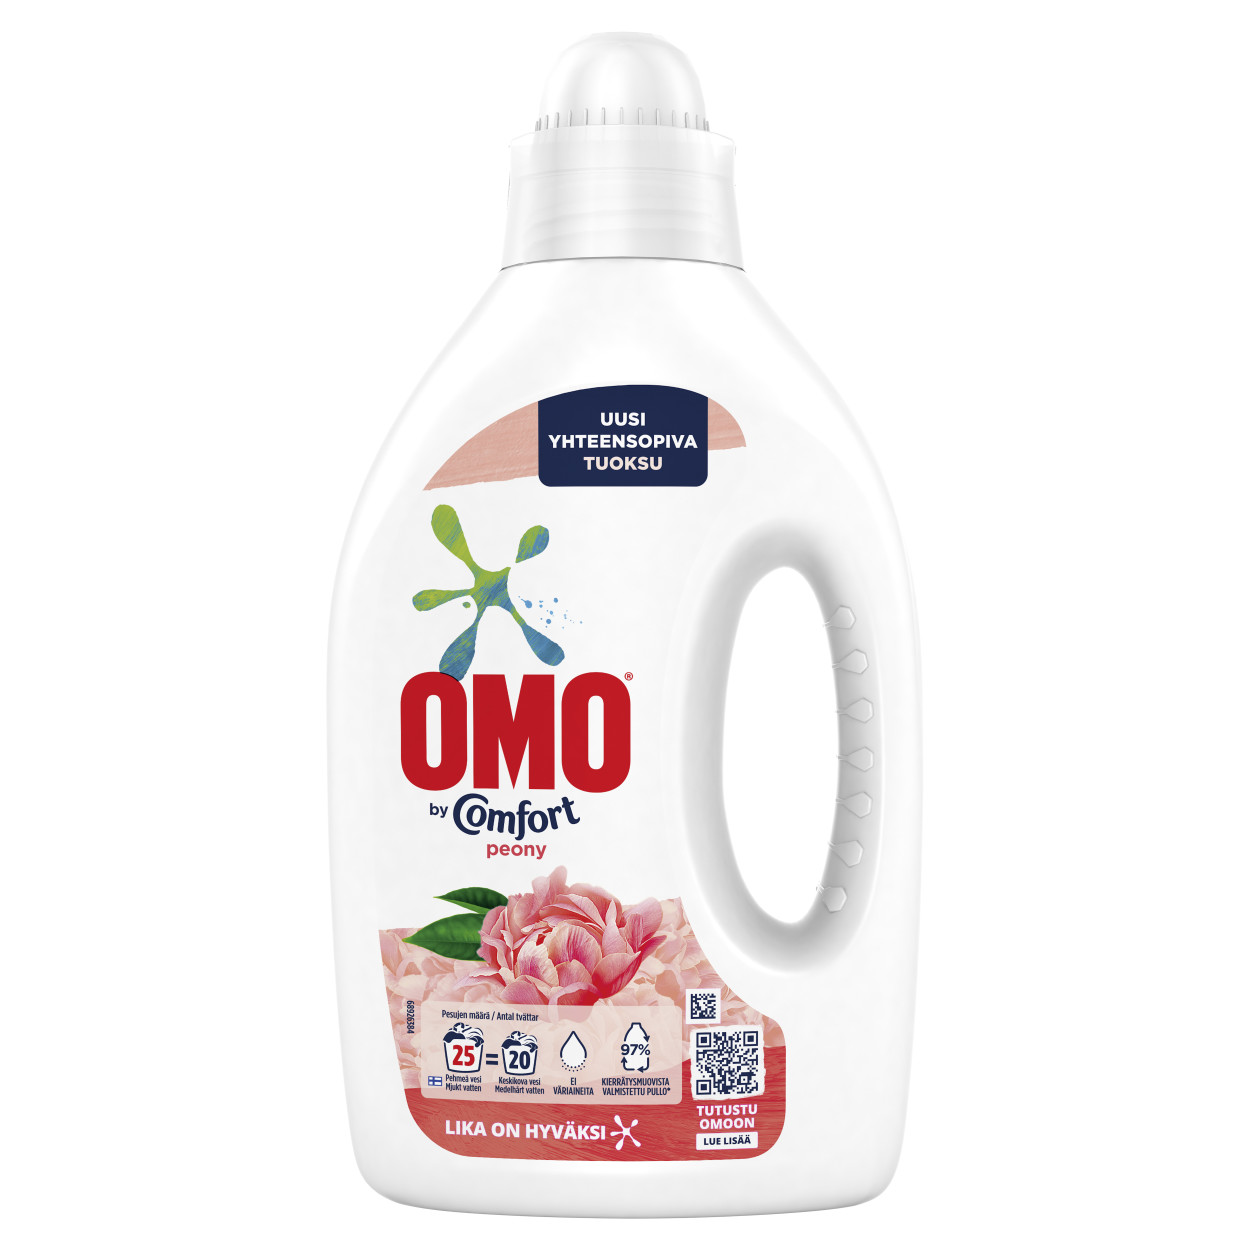 Omo by Comfort